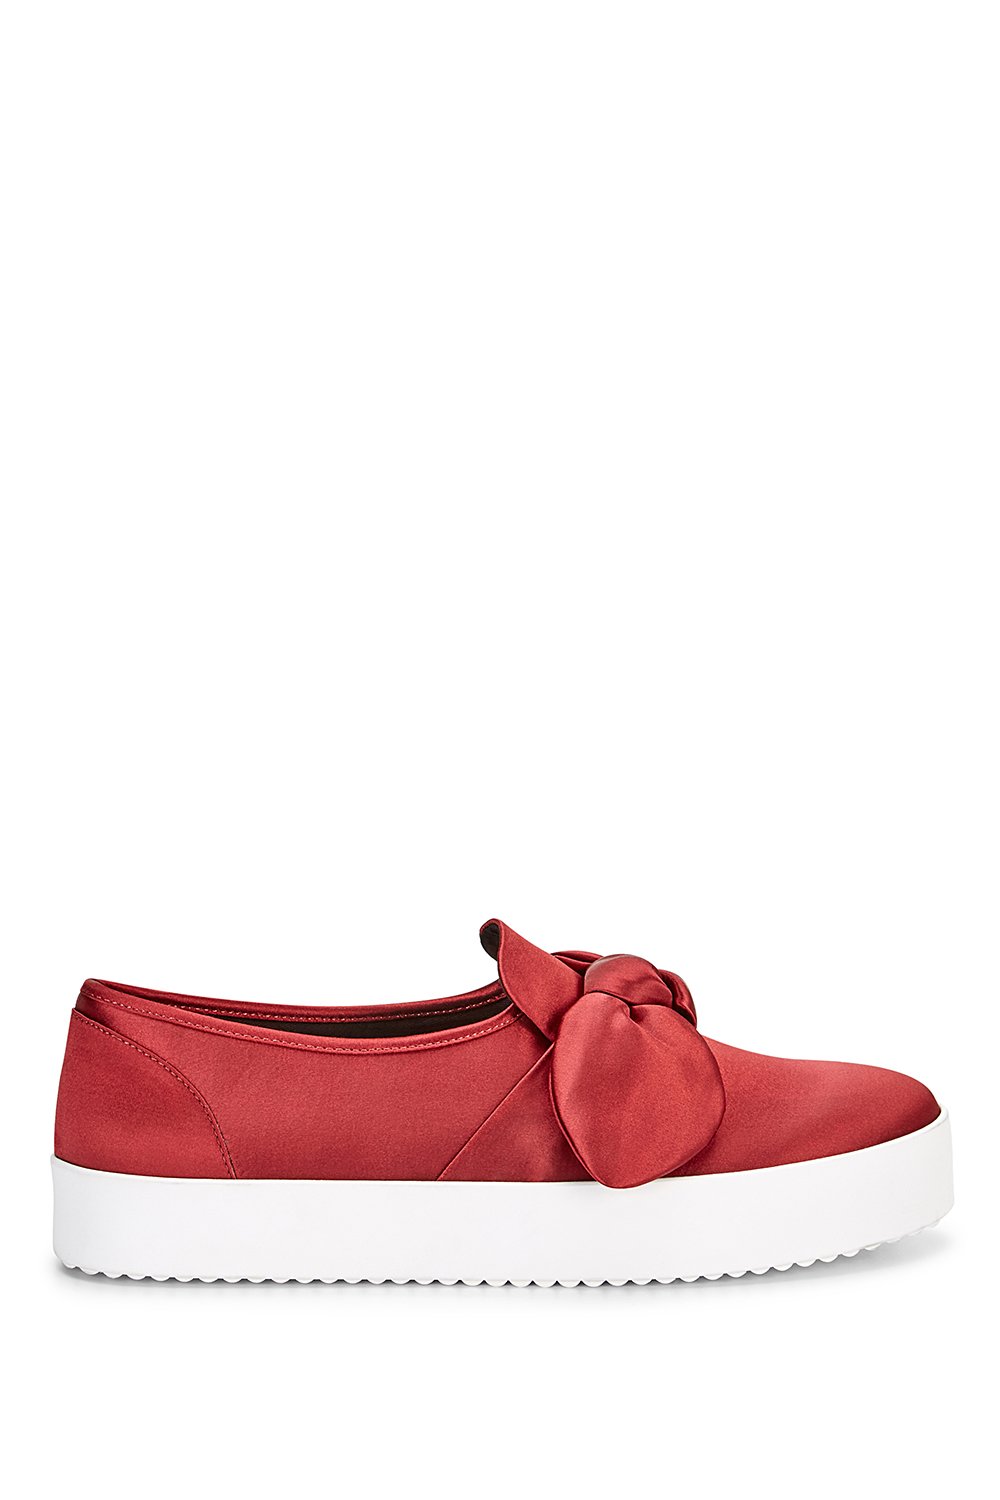 Stacey Sneaker